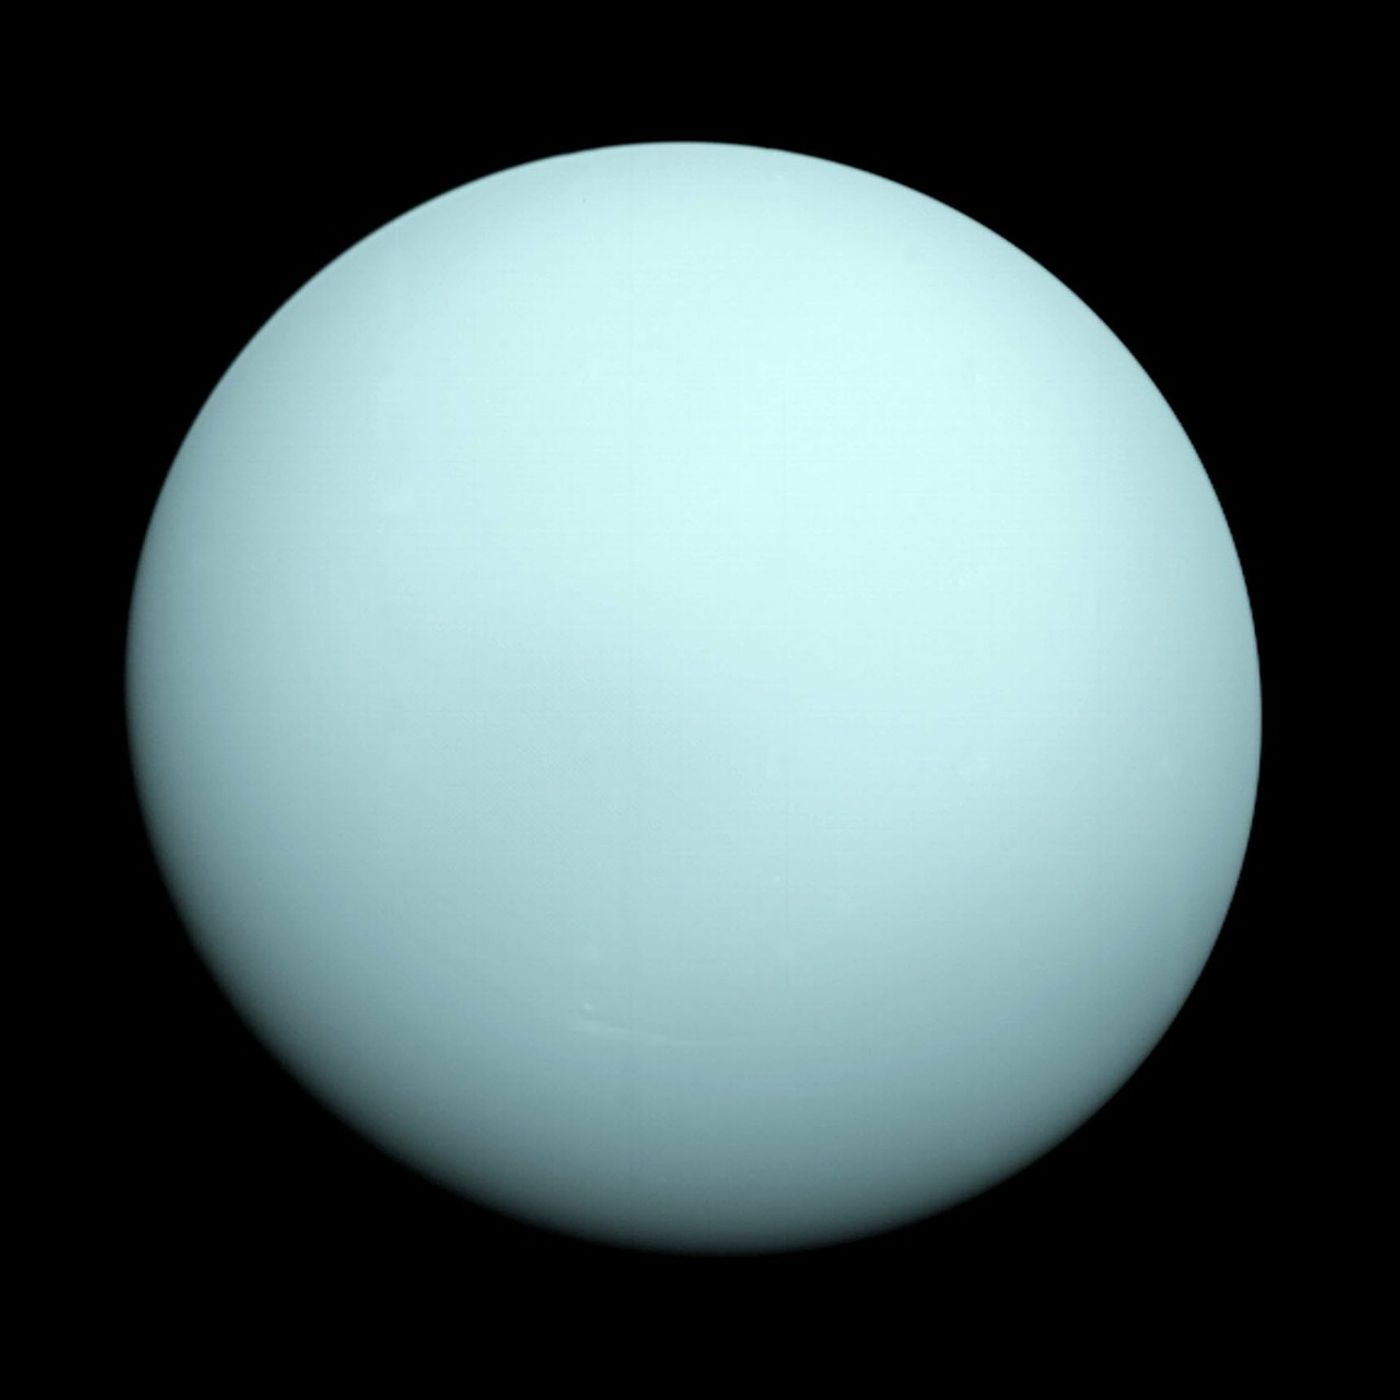 Uranus is an icy giant planet with many secrets that we've yet to uncover.